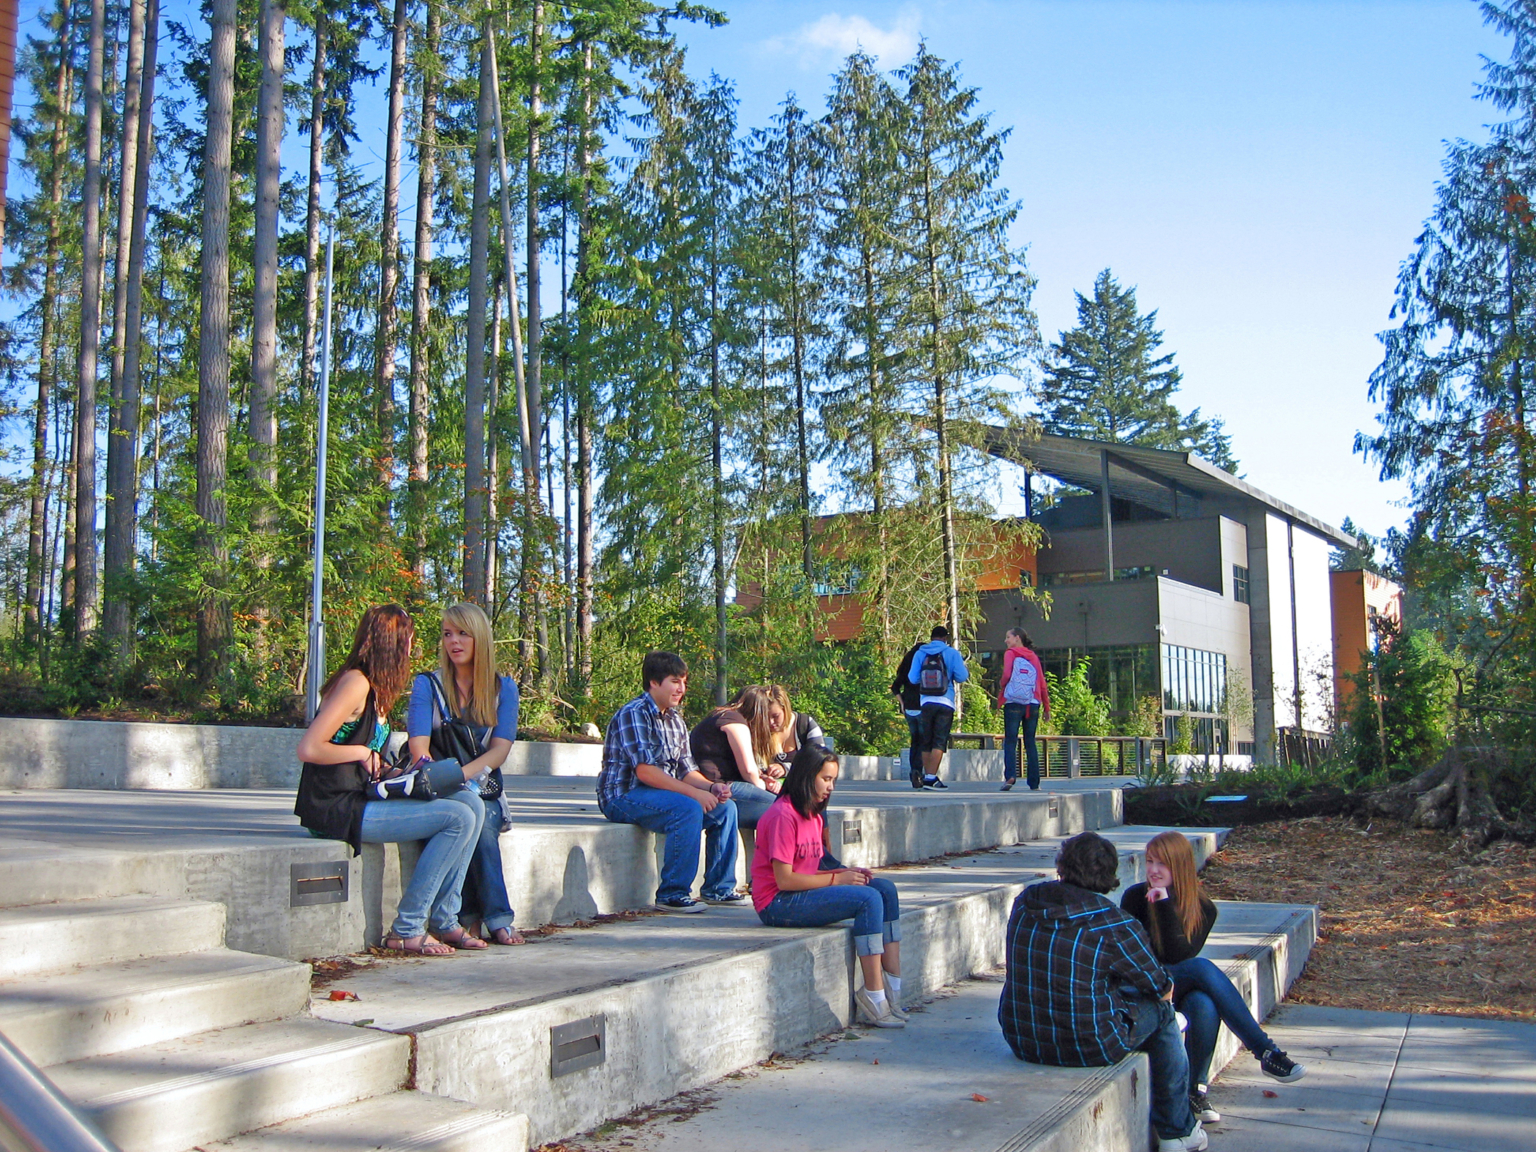 Cement outdoor seating for students to collaborate within the trees on campus at Marysville Getchell High School.